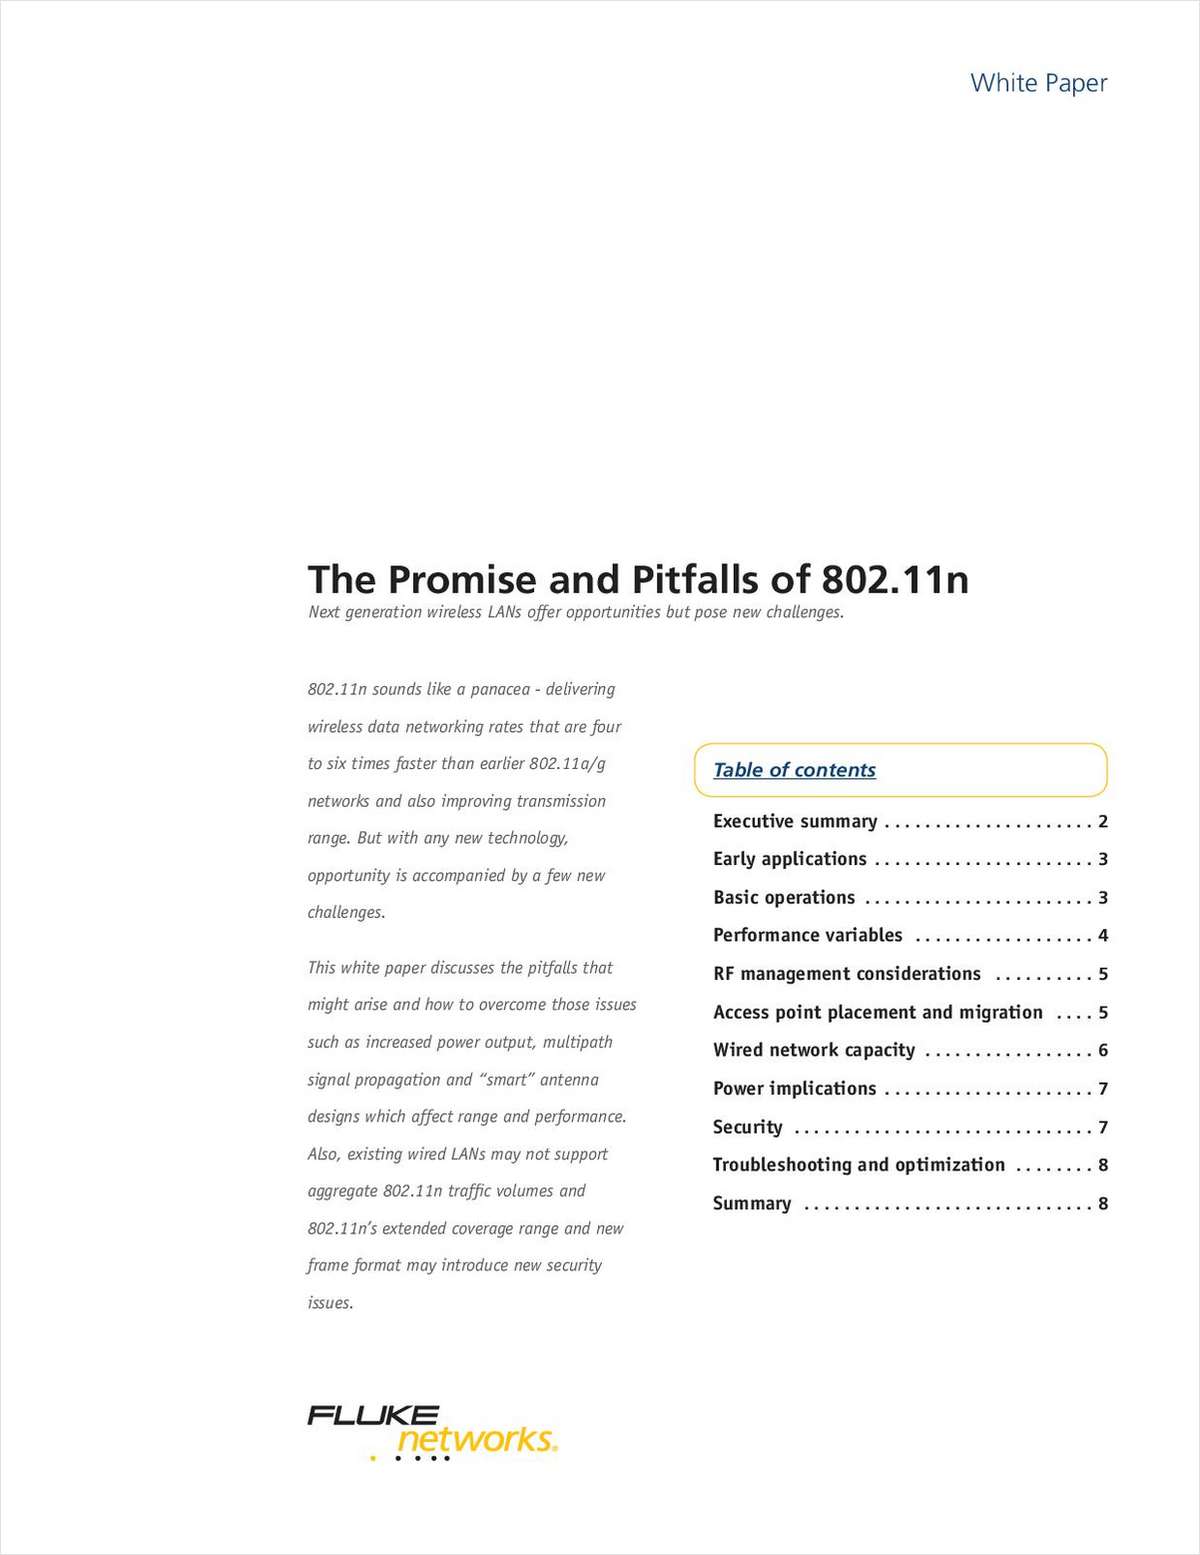 The Promise and Pitfalls of 802.11n